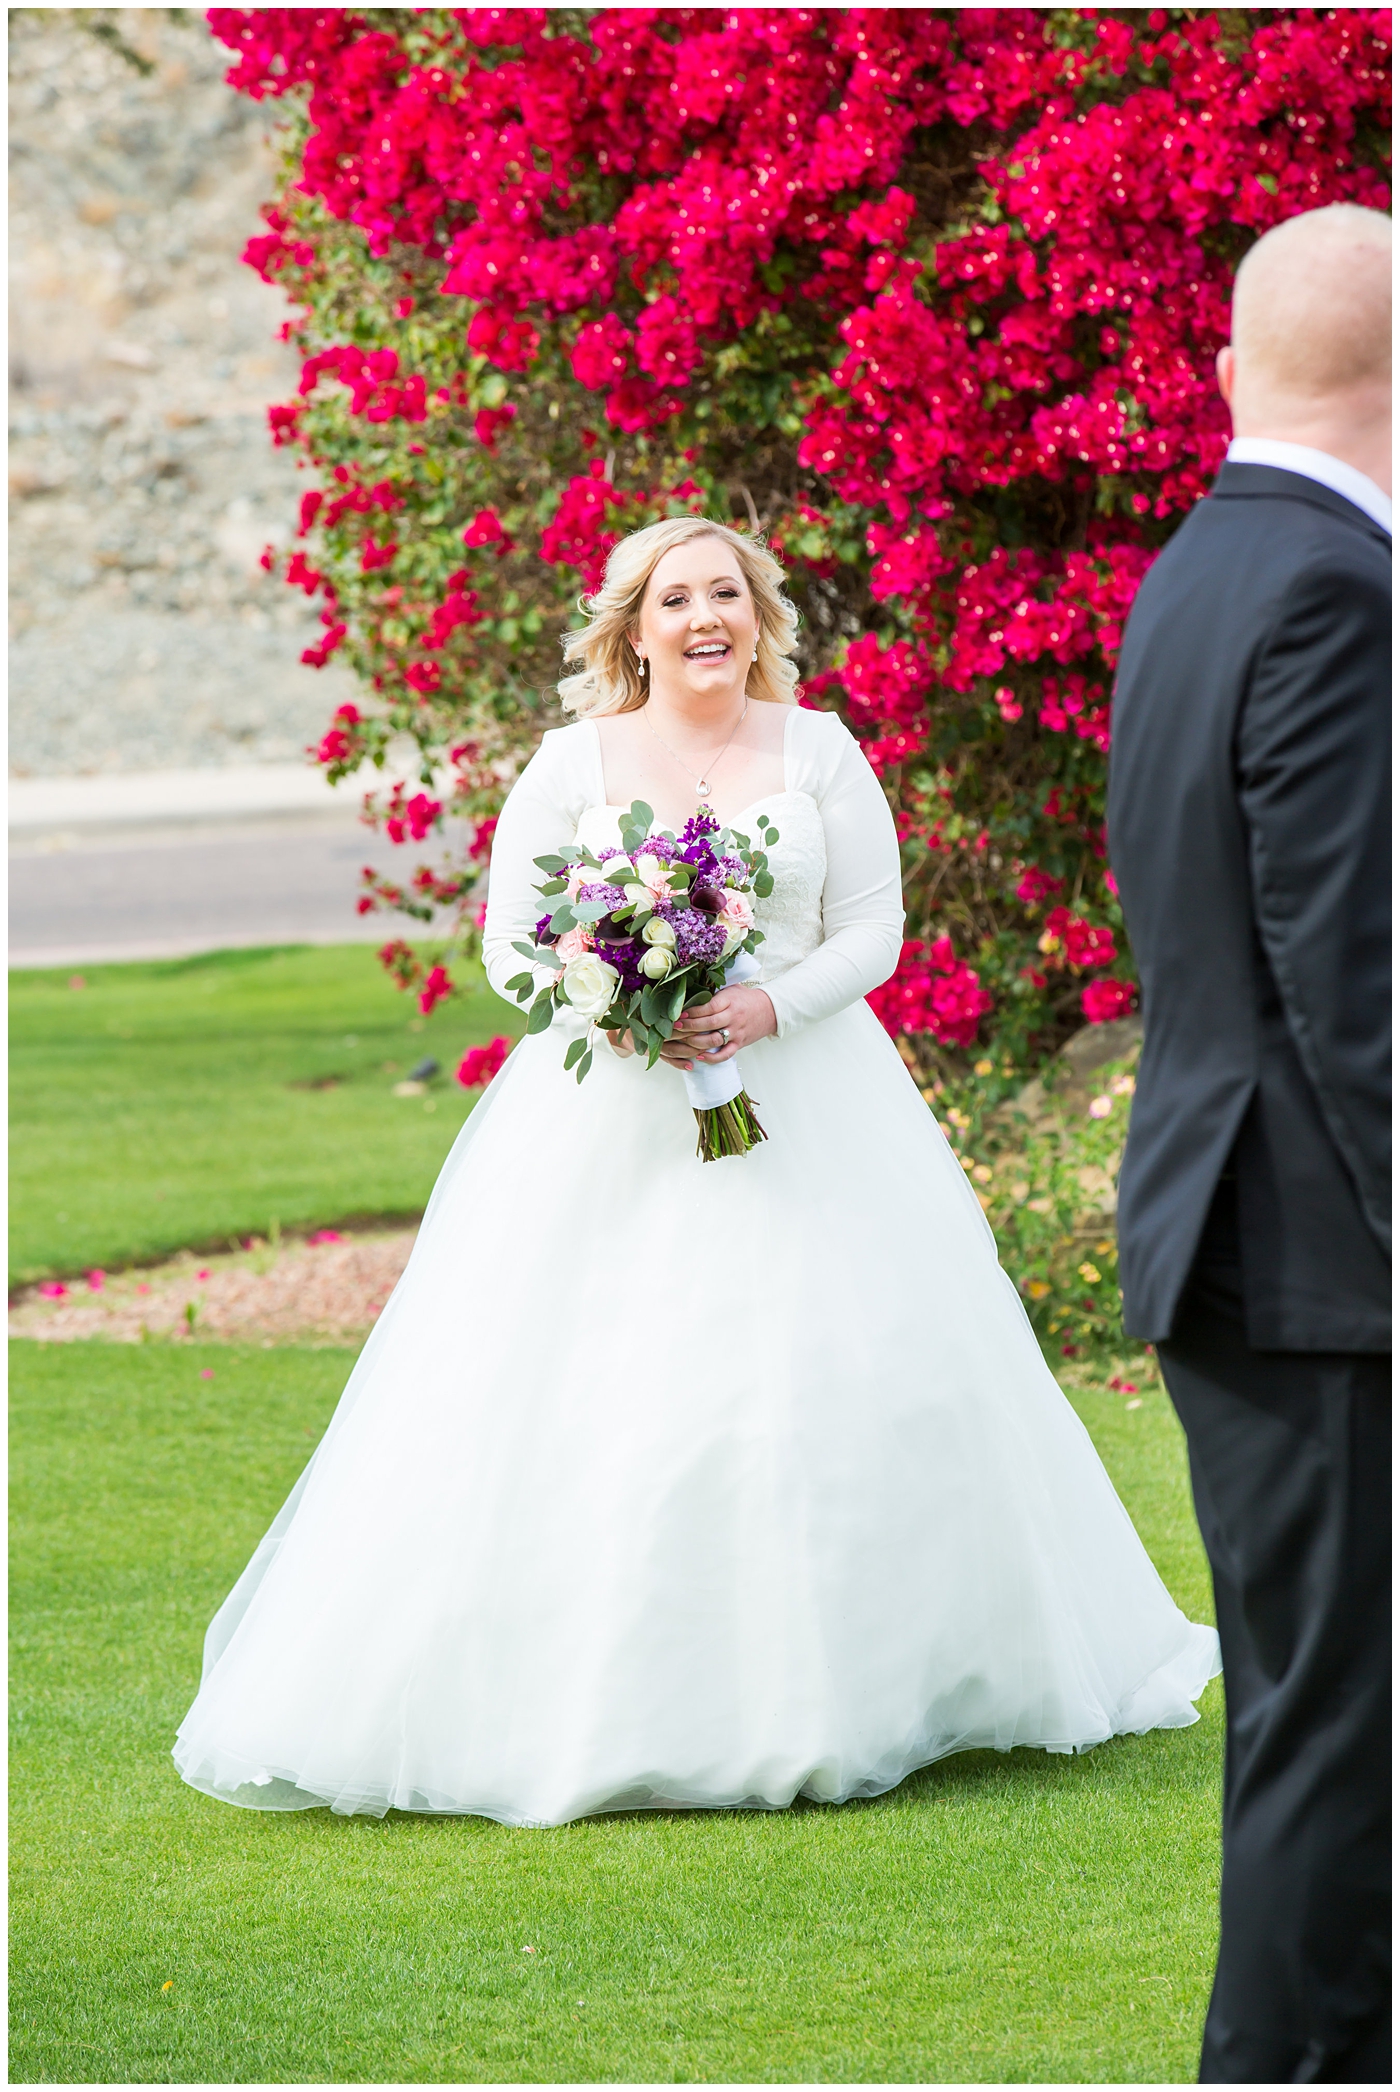 blonde bride in long sleeve wedding dress with purple and white flower bouquet and groom in black suit with purple calla lilly boutonniere first look on wedding day